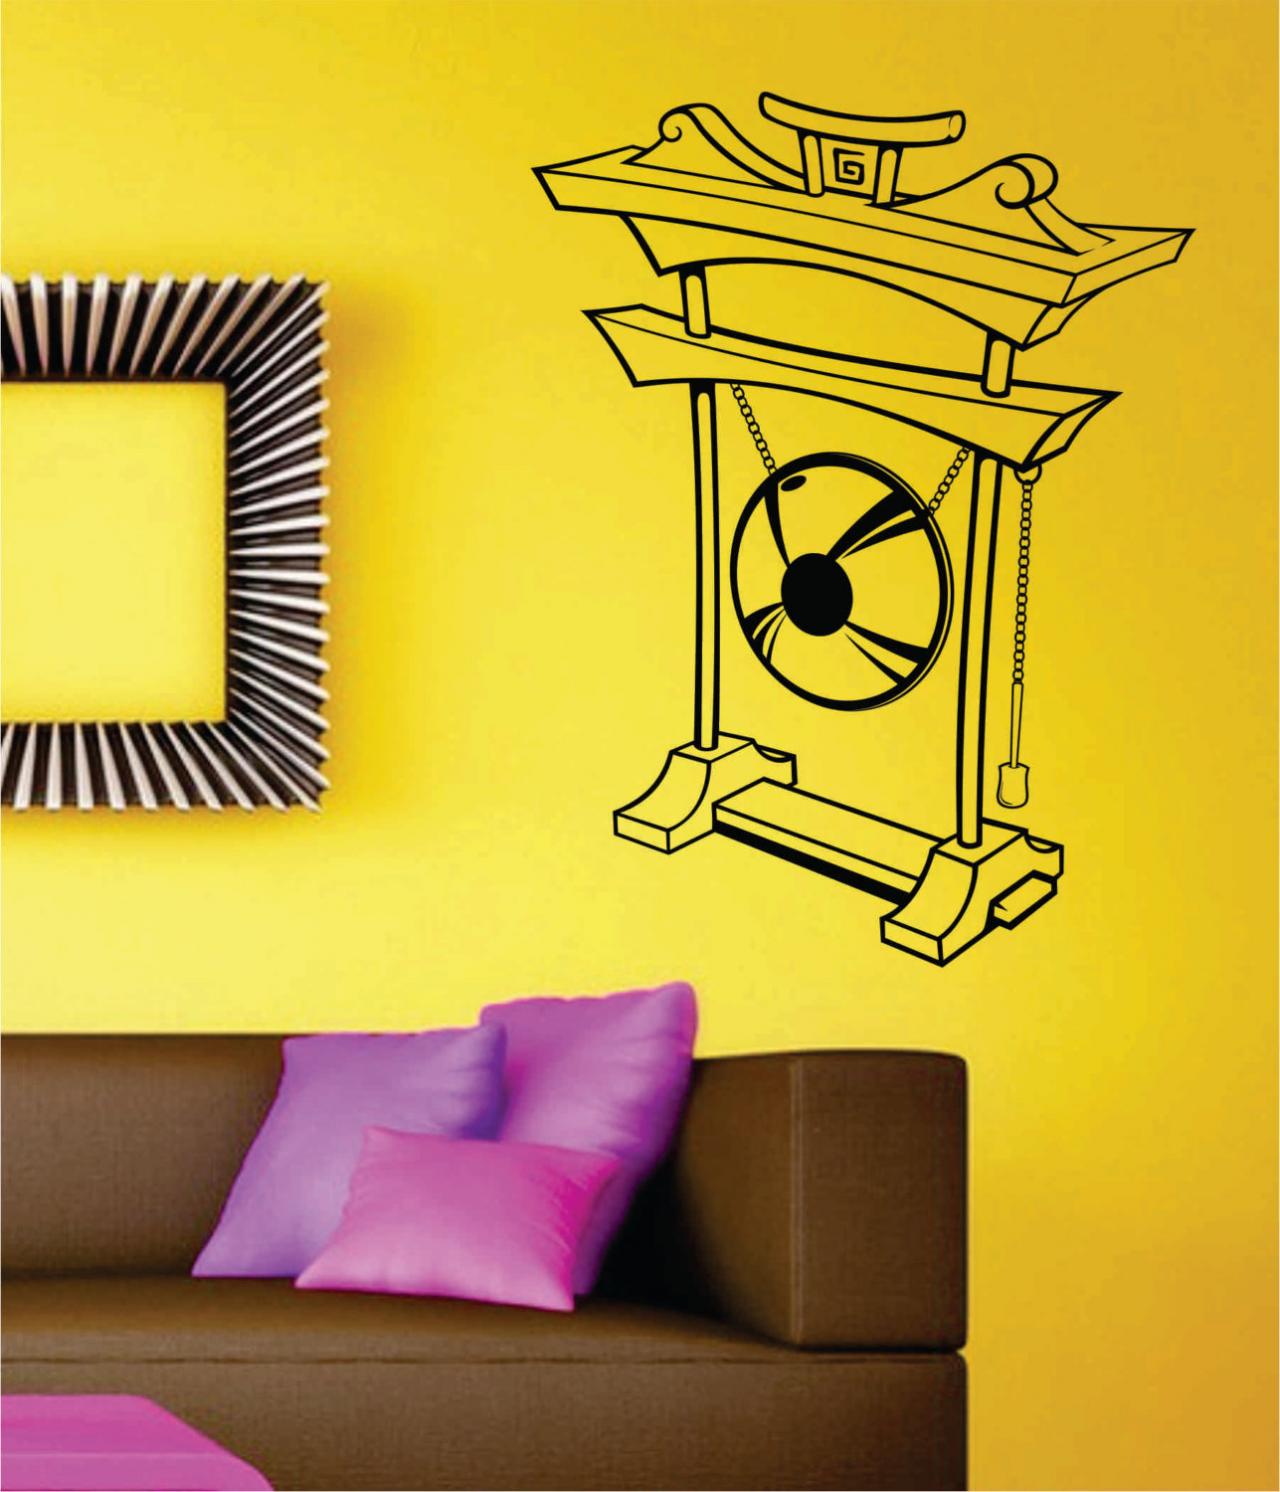 Suspended Gong Wall Decal Sticker Art Graphic